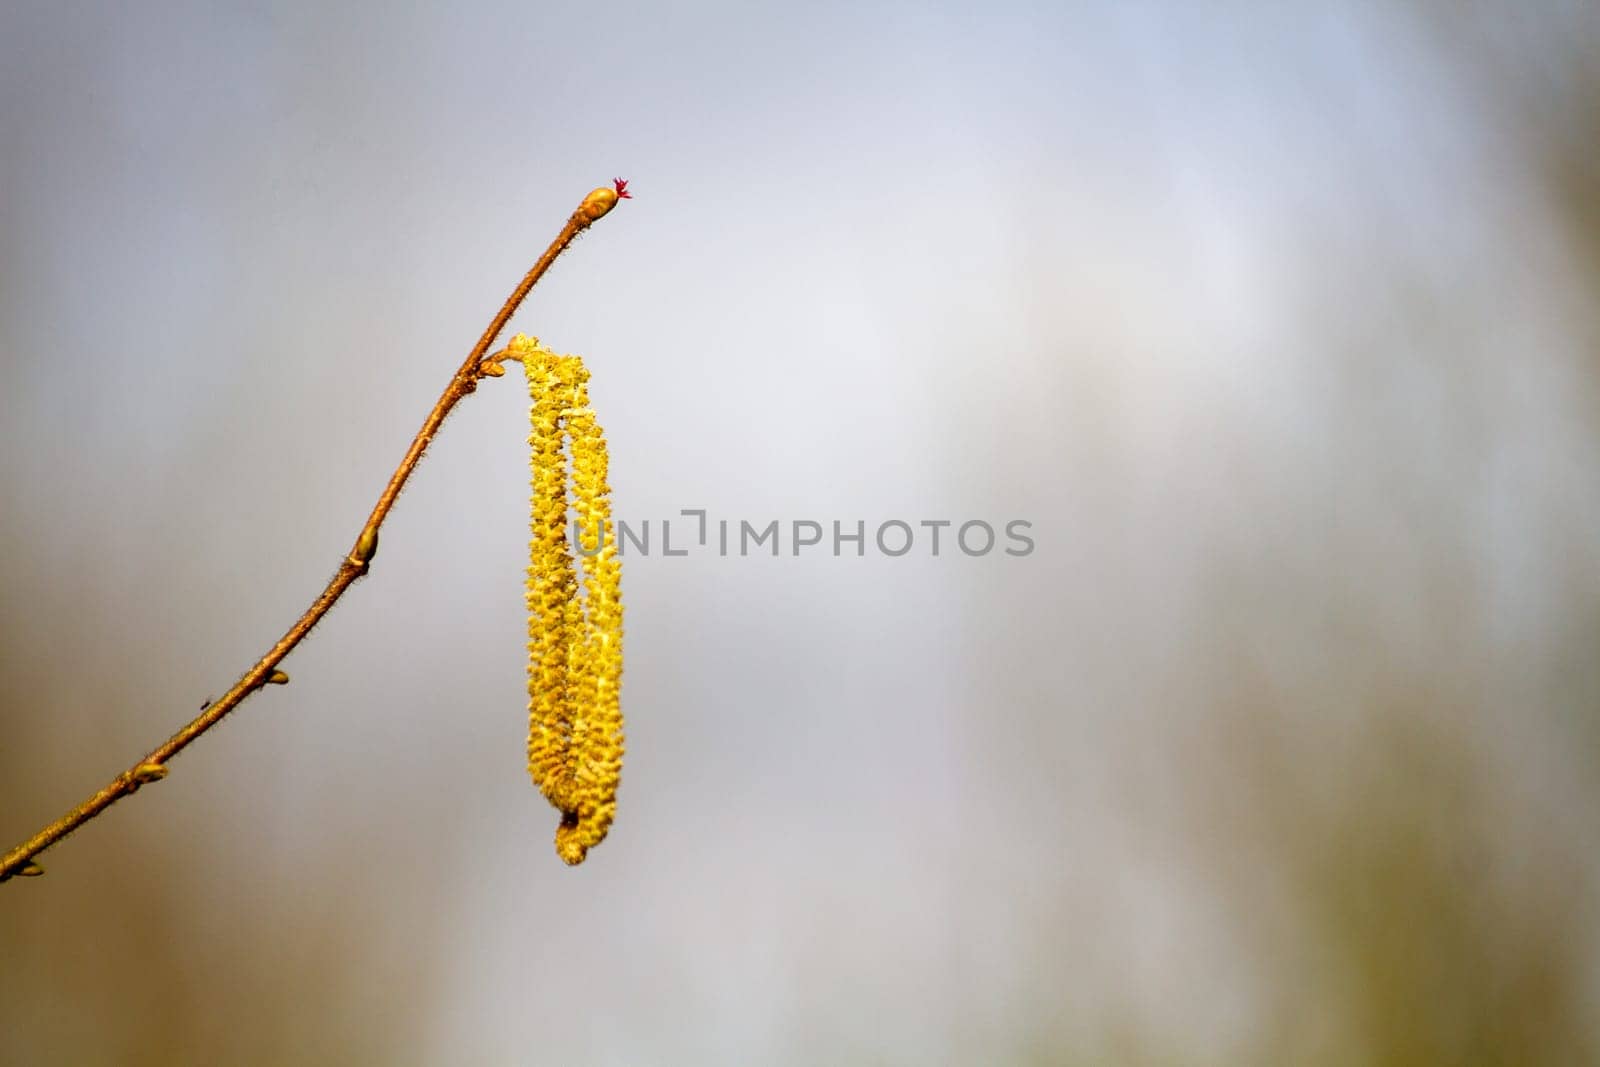 A vivid yellow flower gracefully dangles from a slender twig.